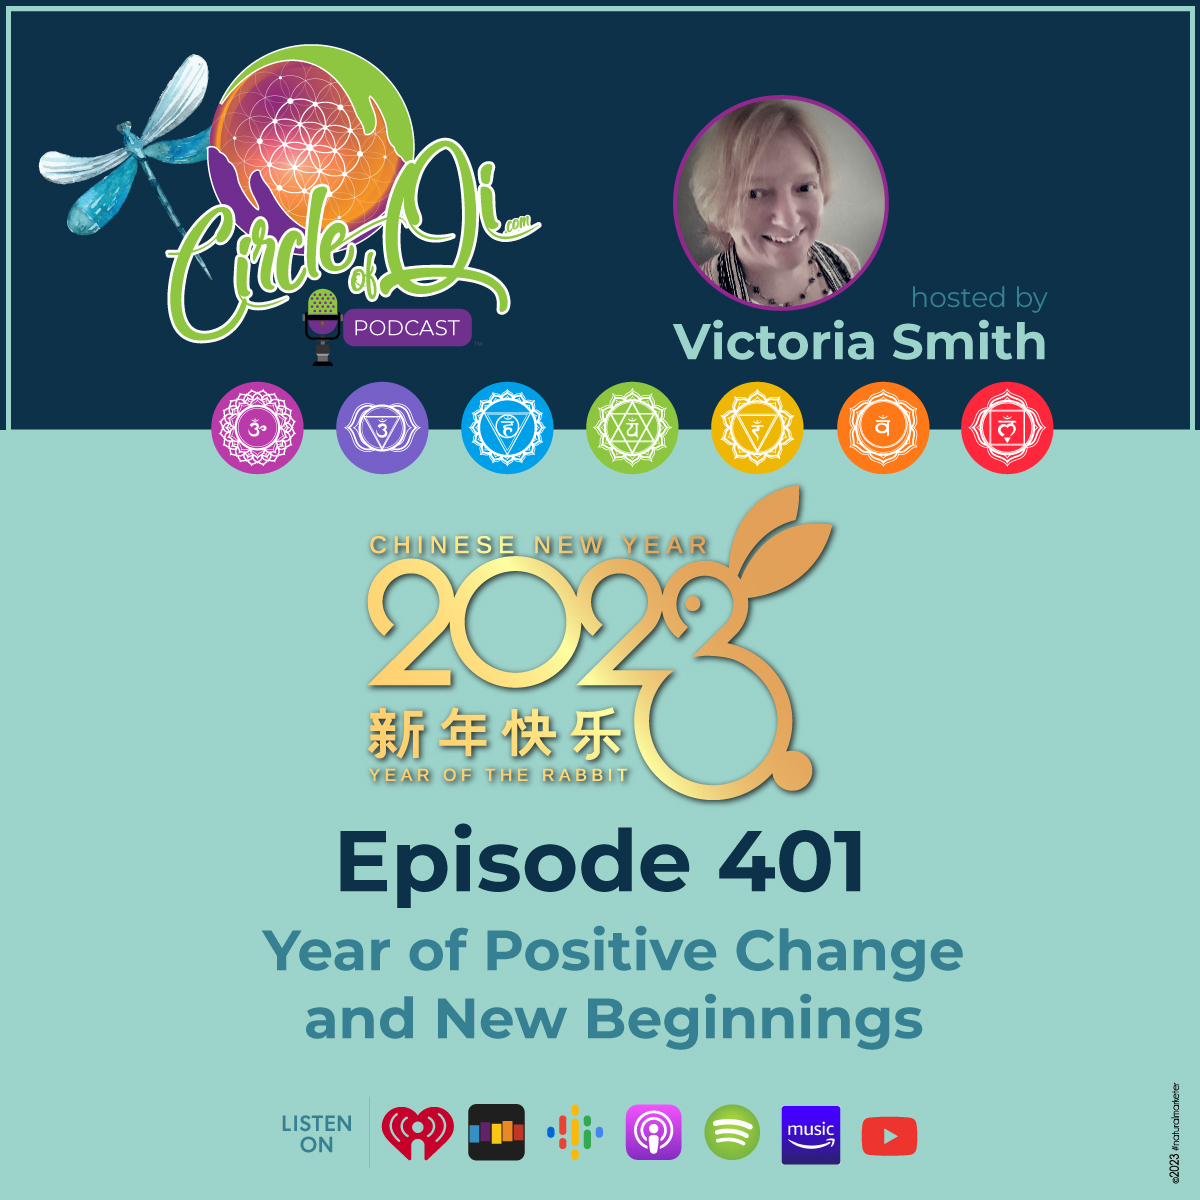 Episode 401: Year of Positive Change and New Beginnings